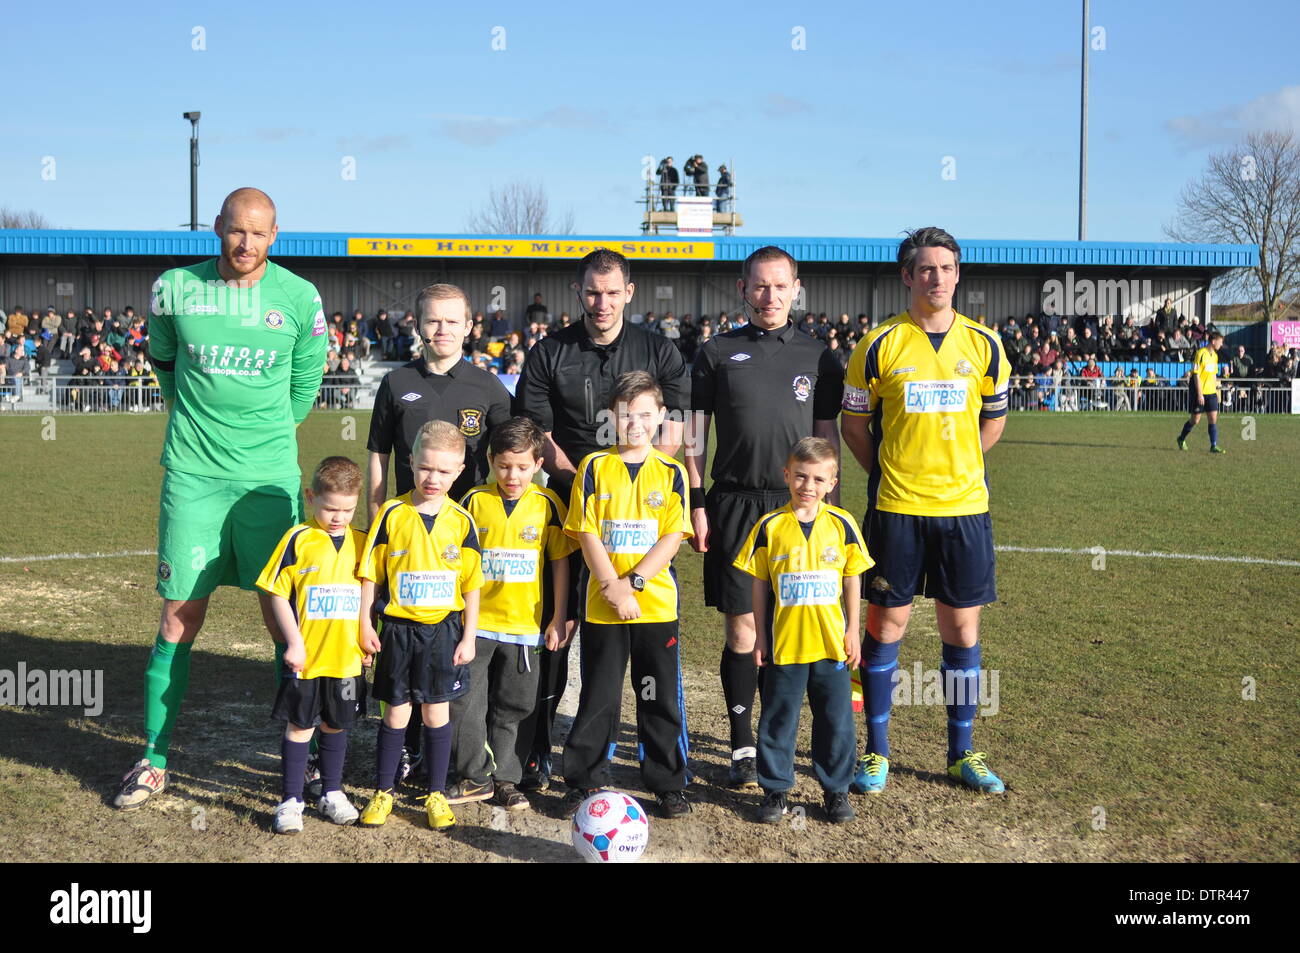 Gosport, UIK. 22nd Feb, 2014. Captains mascots and officials pose in the centre circle.Gosport Borough v Havant & Waterlooville, Semi Final, FA Trophy, 22nd February 2014 (c) Paul Gordon, Alamy Live News Stock Photo